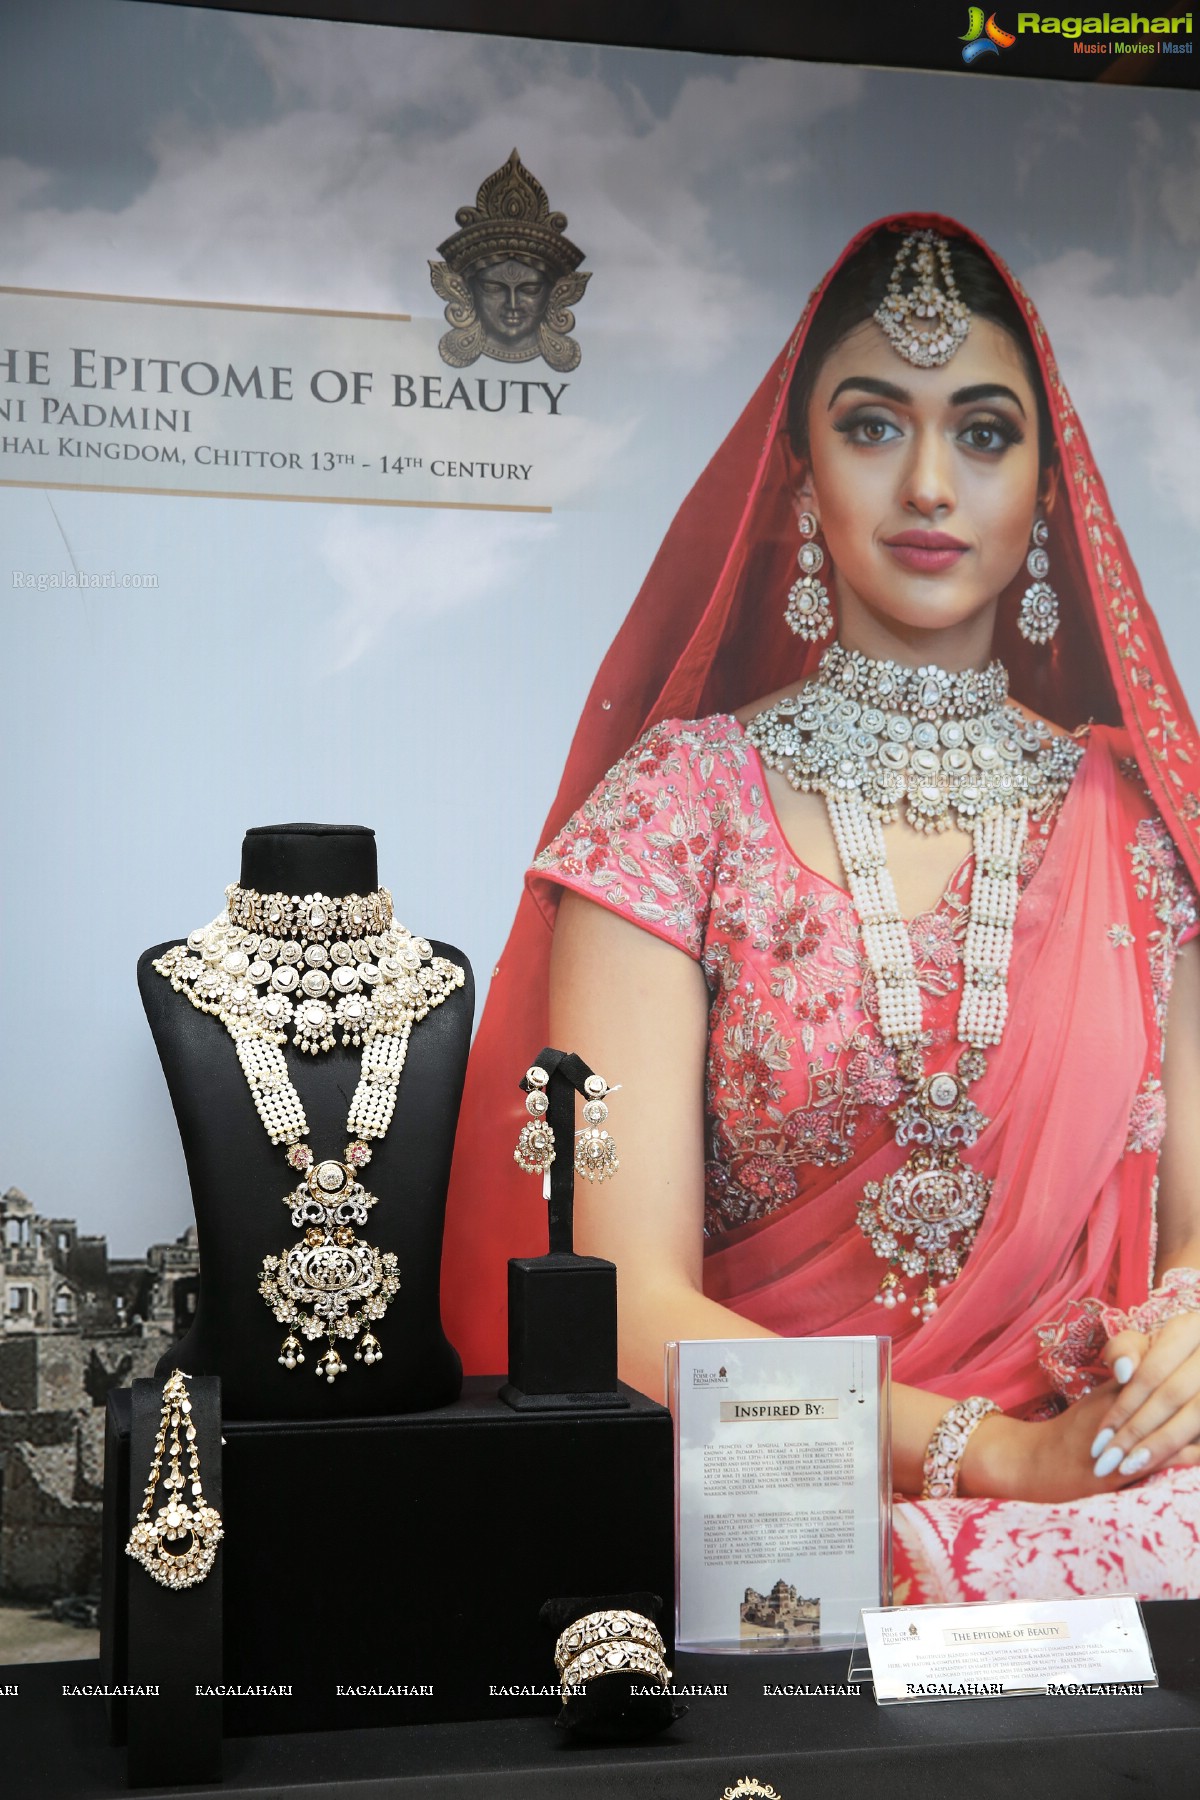 The Royal Navarathri Collection & Dolphin D3 Exhibition by Kalasha Jewels